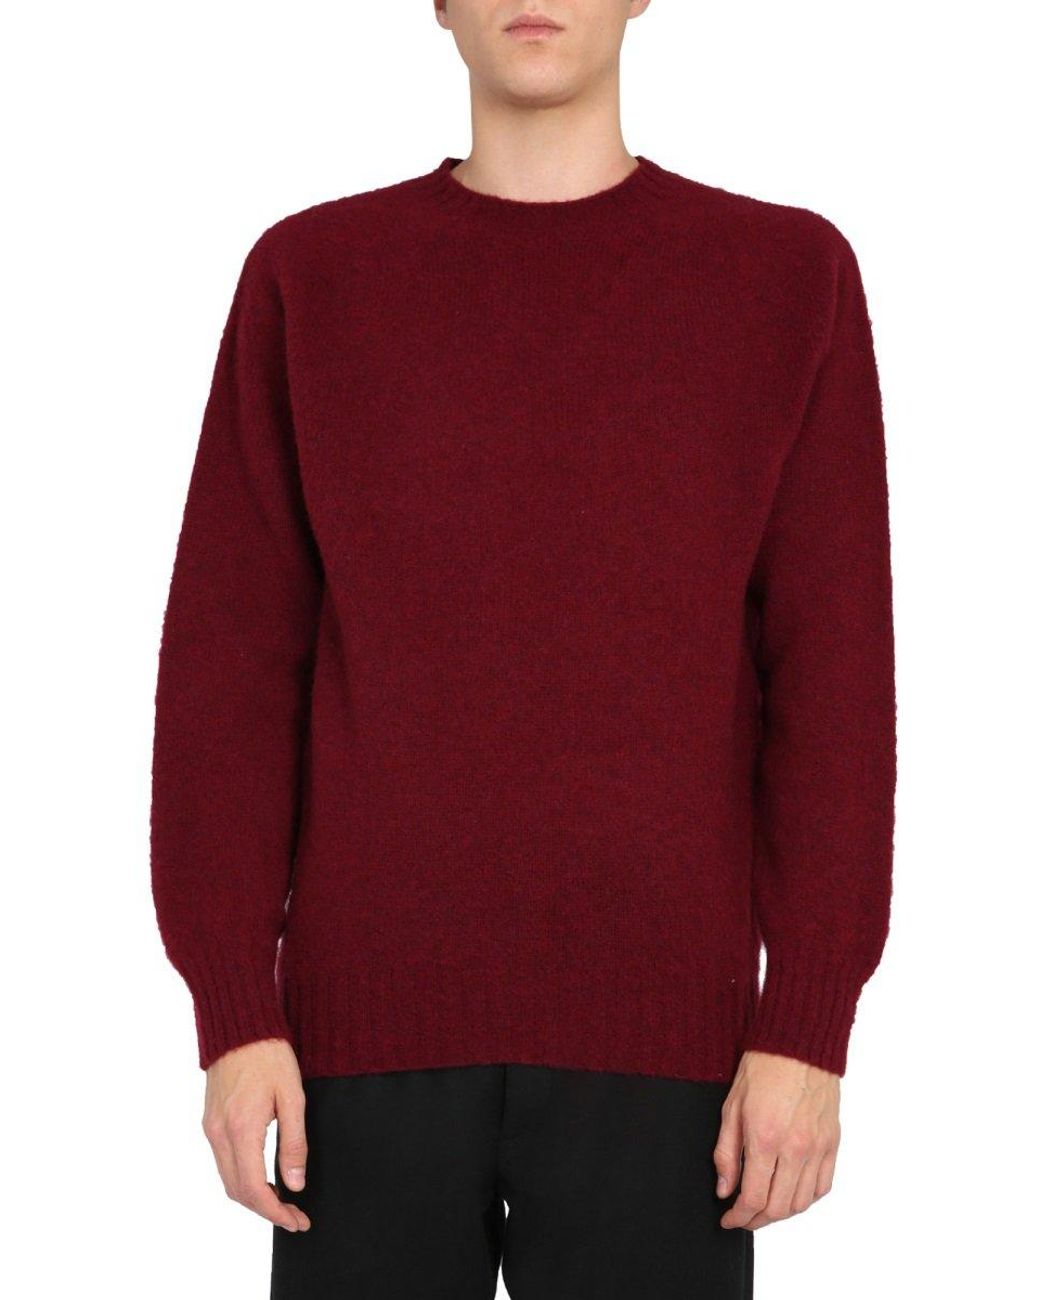 YMC Wool Crew Neck Sweater in Red for Men - Save 12% - Lyst